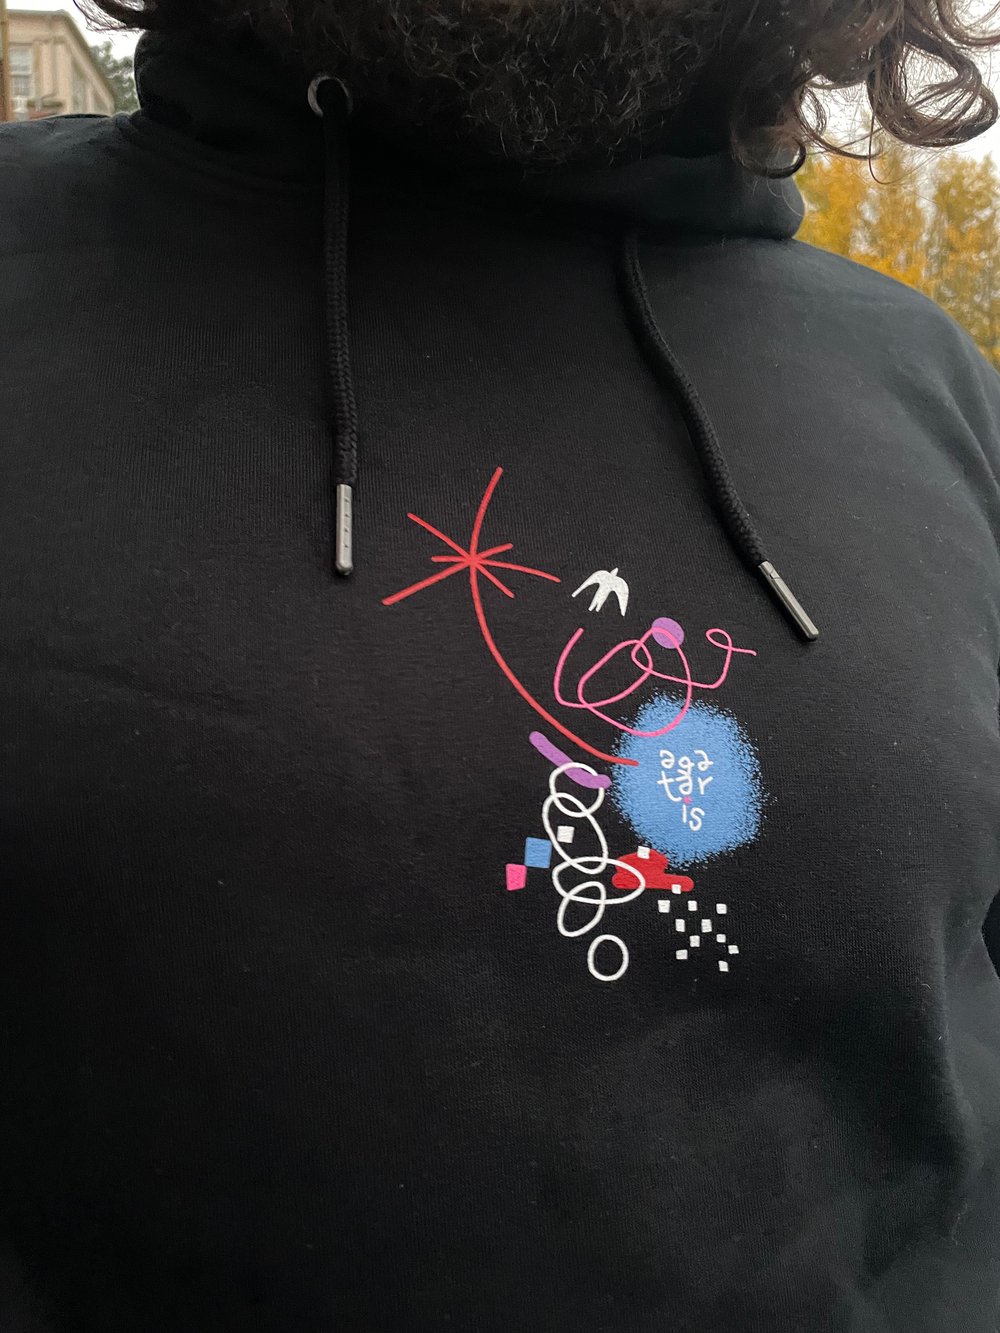 Image of Abstract black hoodie